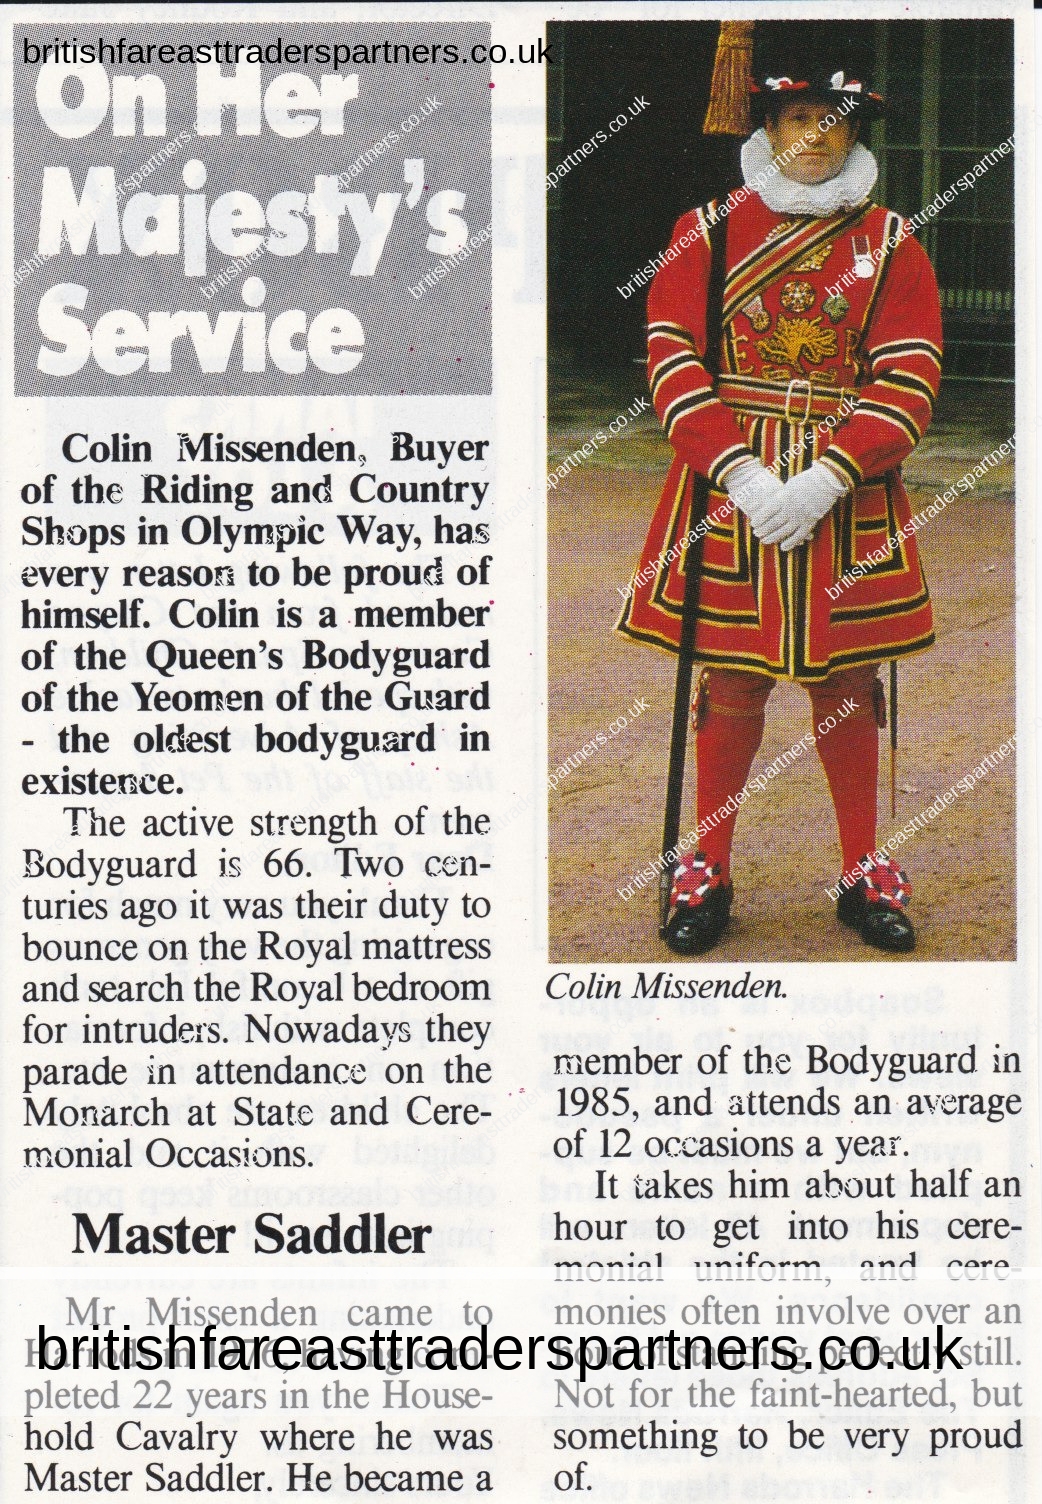 VINTAGE 1988 PHOTO ARTICLE HARRODS NEWS  ISSUE 11 APRIL 1988 “COLIN MISSENDEN” MEMBER OF THE QUEEN’S BODYGUARD OF THE YEOMEN OF THE GUARD COLLECTABLES | PAPER & EPHEMERA | PAPER & EPHEMERA | SOCIETY |  BRITISH | LIFESTYLE | CULTURE |  HISTORY | HERITAGE